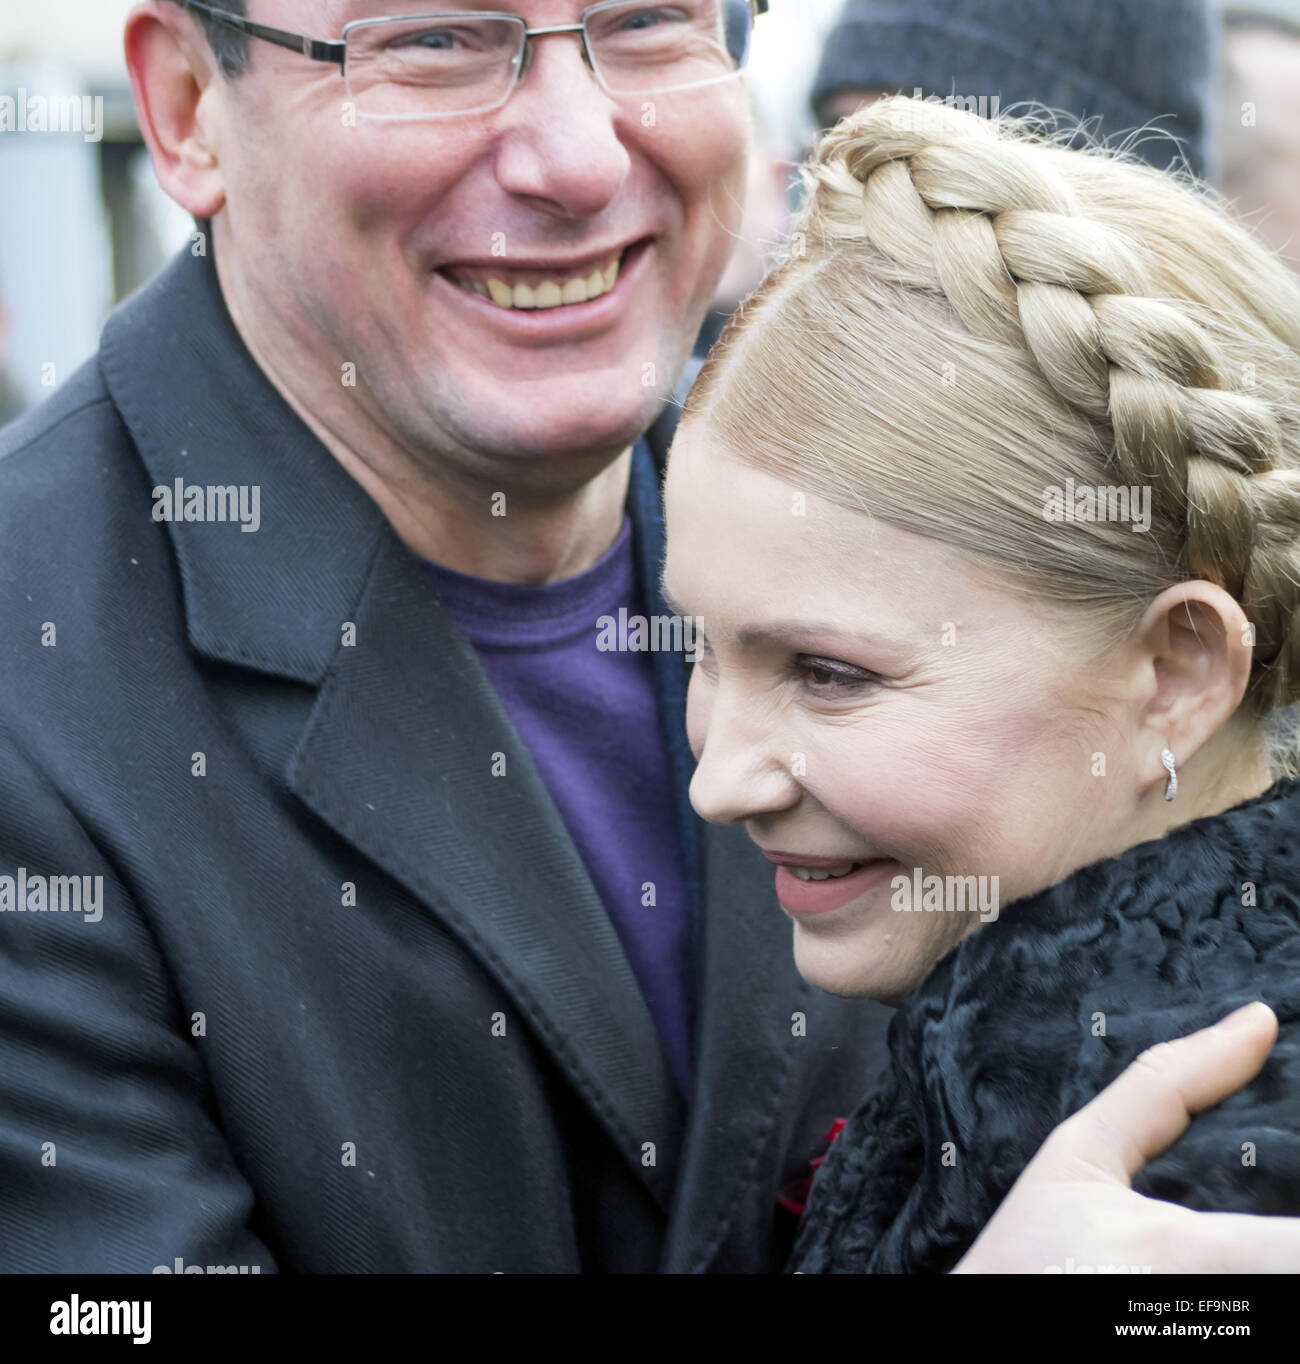 Leaders of political parties Block Yuriy Lutsenko Poroshenko welcomes Yulia Tymoshenko. 29th Jan, 2015. -- Ukrainian politicinas, January 29, 2015, attended the ceremony Kruty Heroes, young guys who on this day in 1918 near the station Kruty in Chernihiv region entered into an unequal battle with the Bolsheviks and died a heroic death for the Ukrainian People's Republic. © Igor Golovniov/ZUMA Wire/Alamy Live News Stock Photo